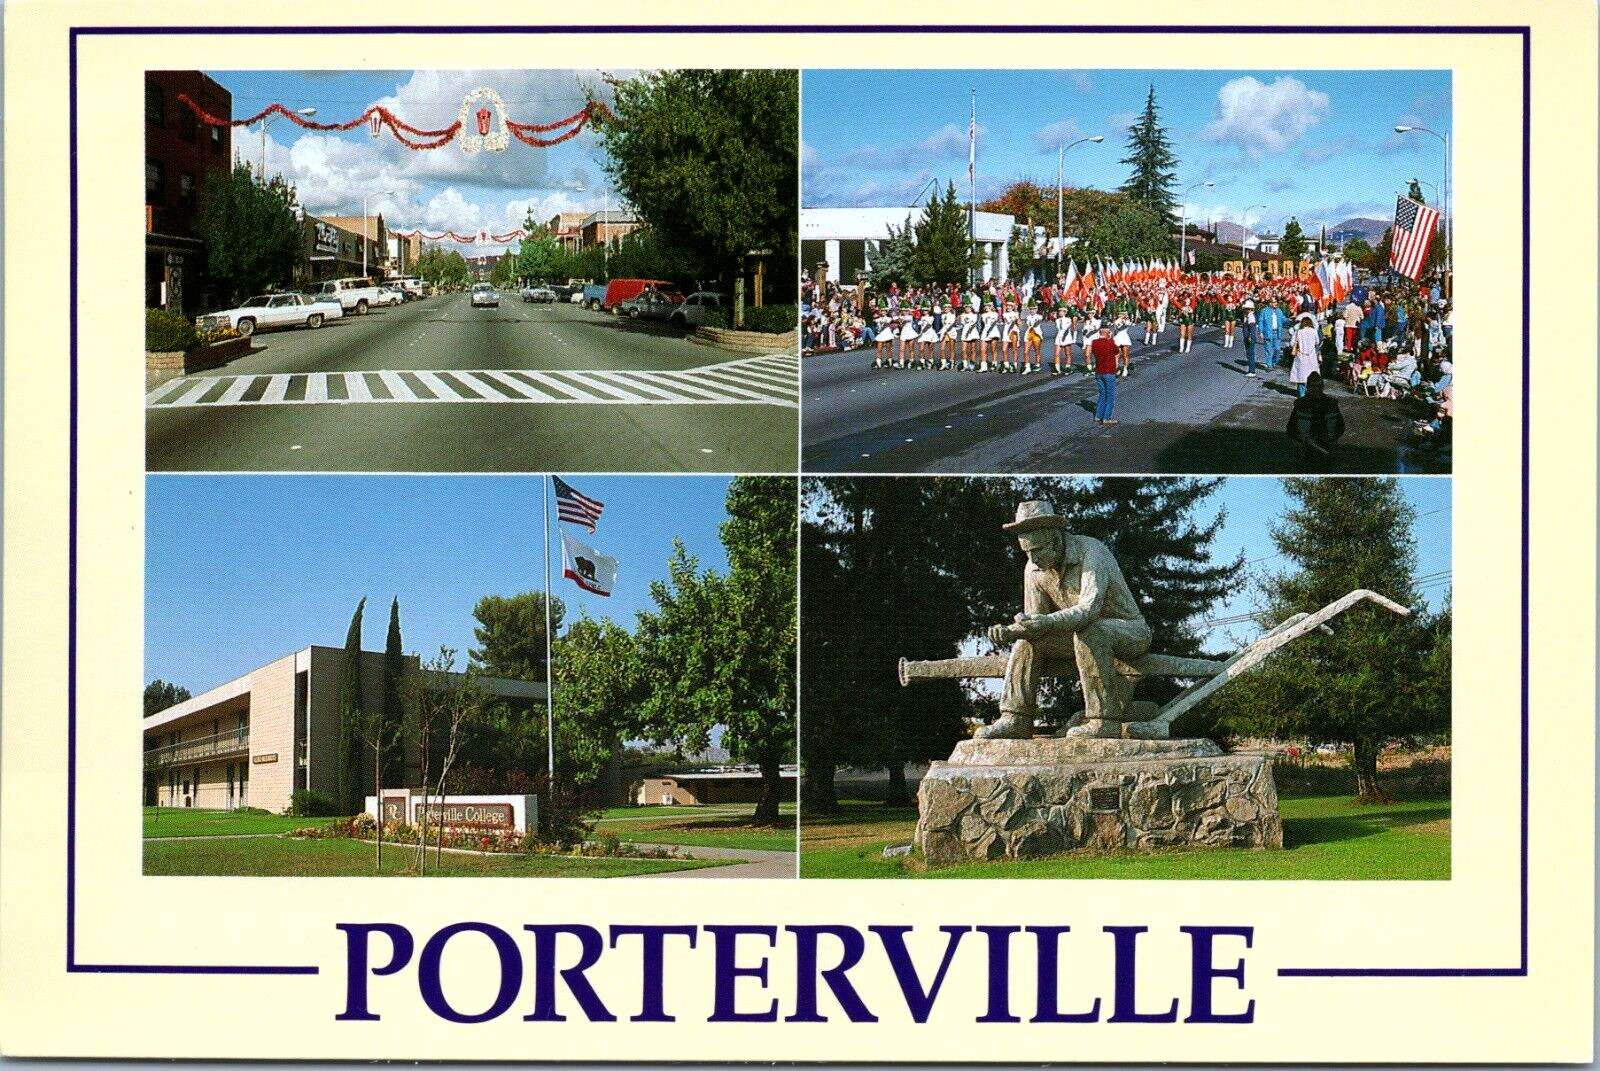 Porterville CA Main Street Parade Marching Band Community College Farmer Statue